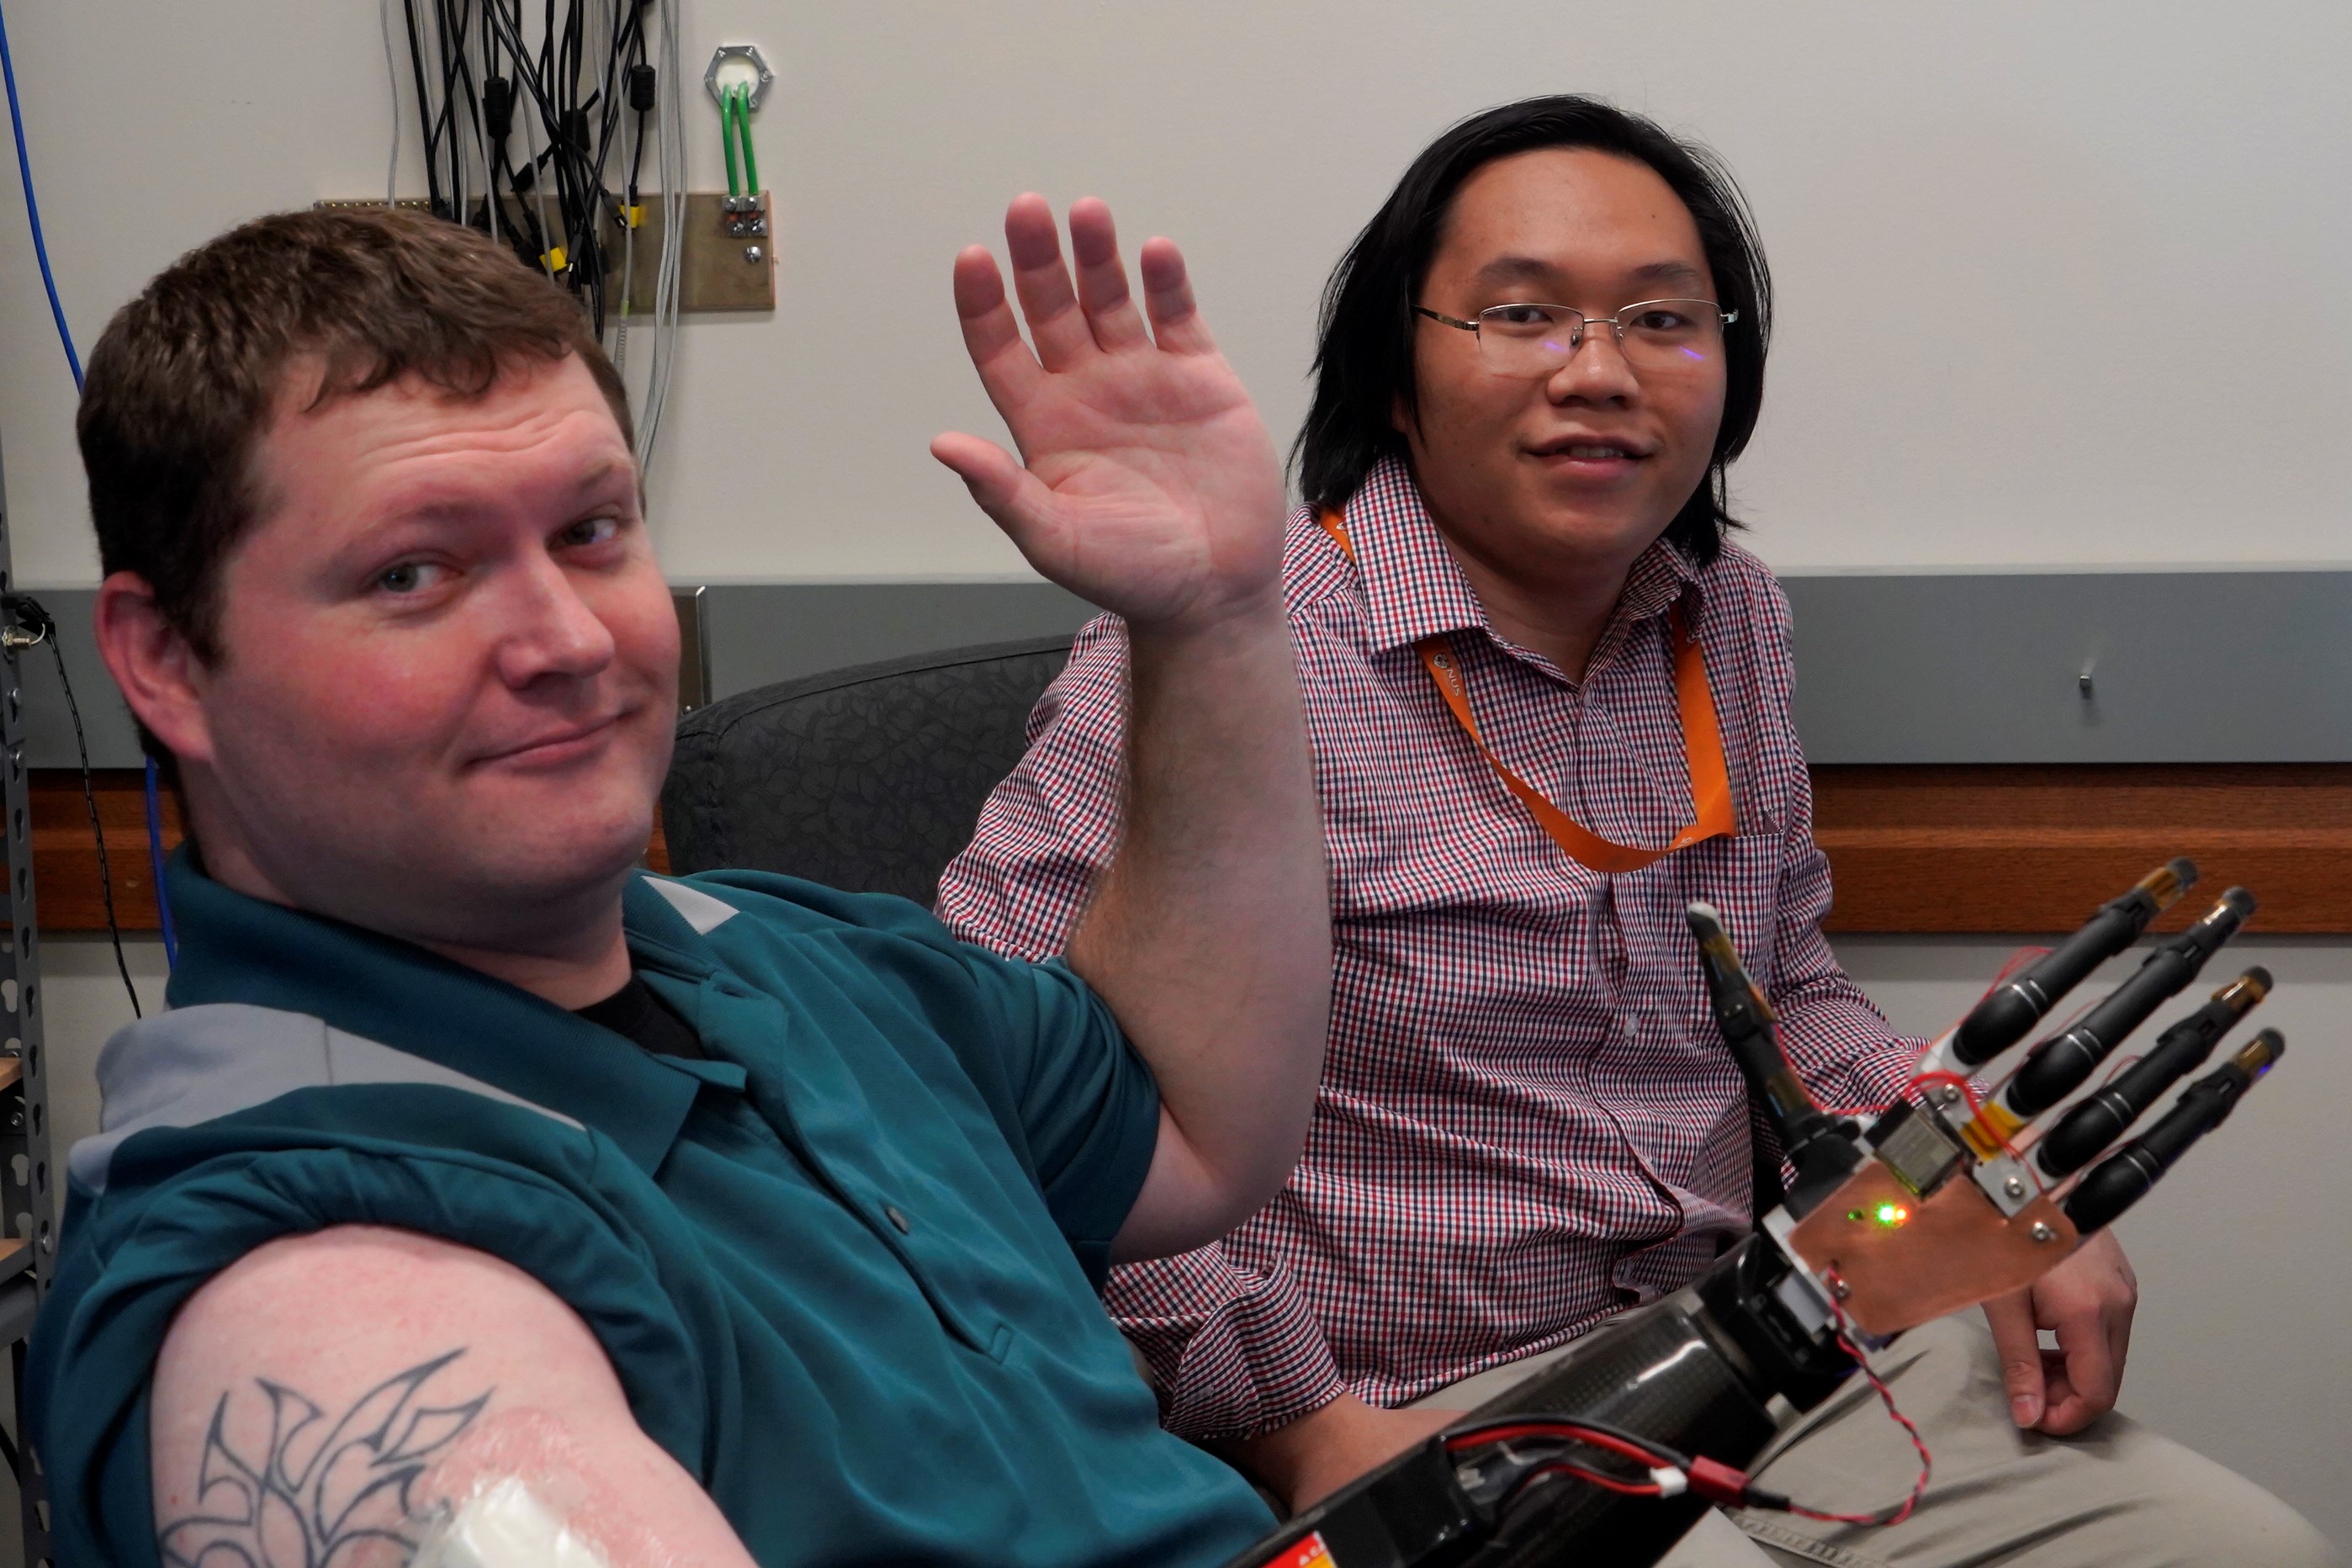 Volunteer Cameron Slavens sits next to Nguyen Anh Tuan as he visits the lab at the University of Minnesota in the U.S. (photo by Dr. Nguyen Anh Tuan)